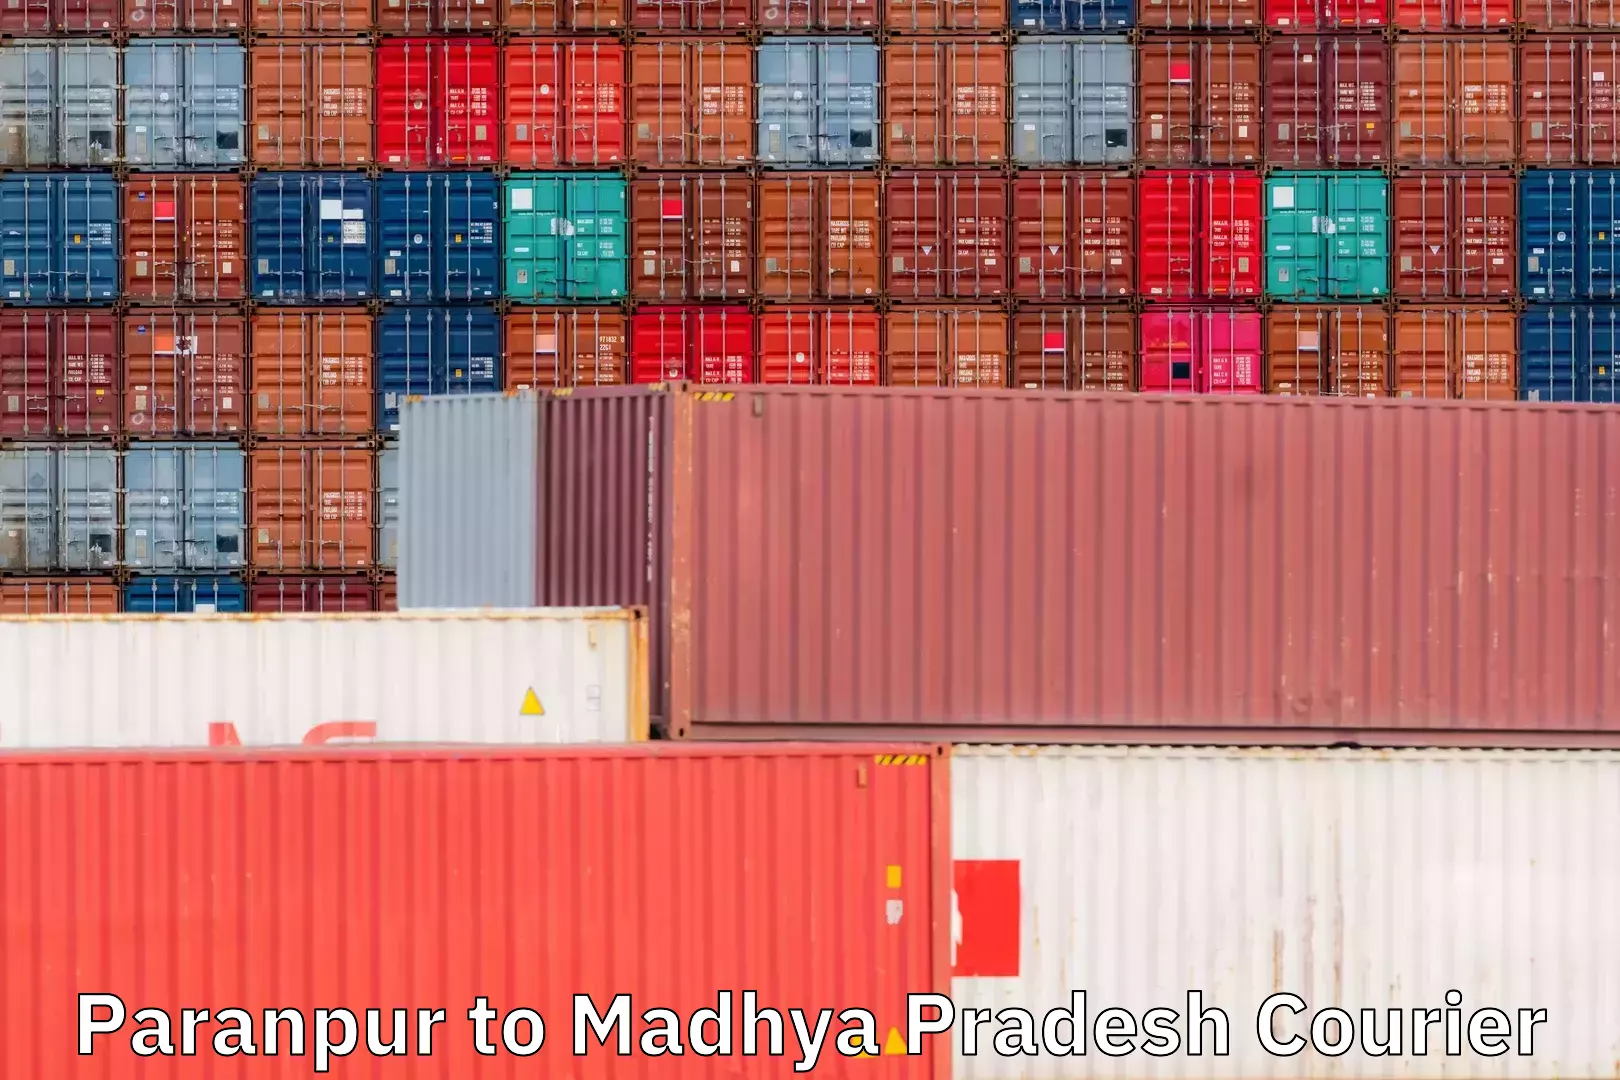 Multi-carrier shipping in Paranpur to Madhya Pradesh